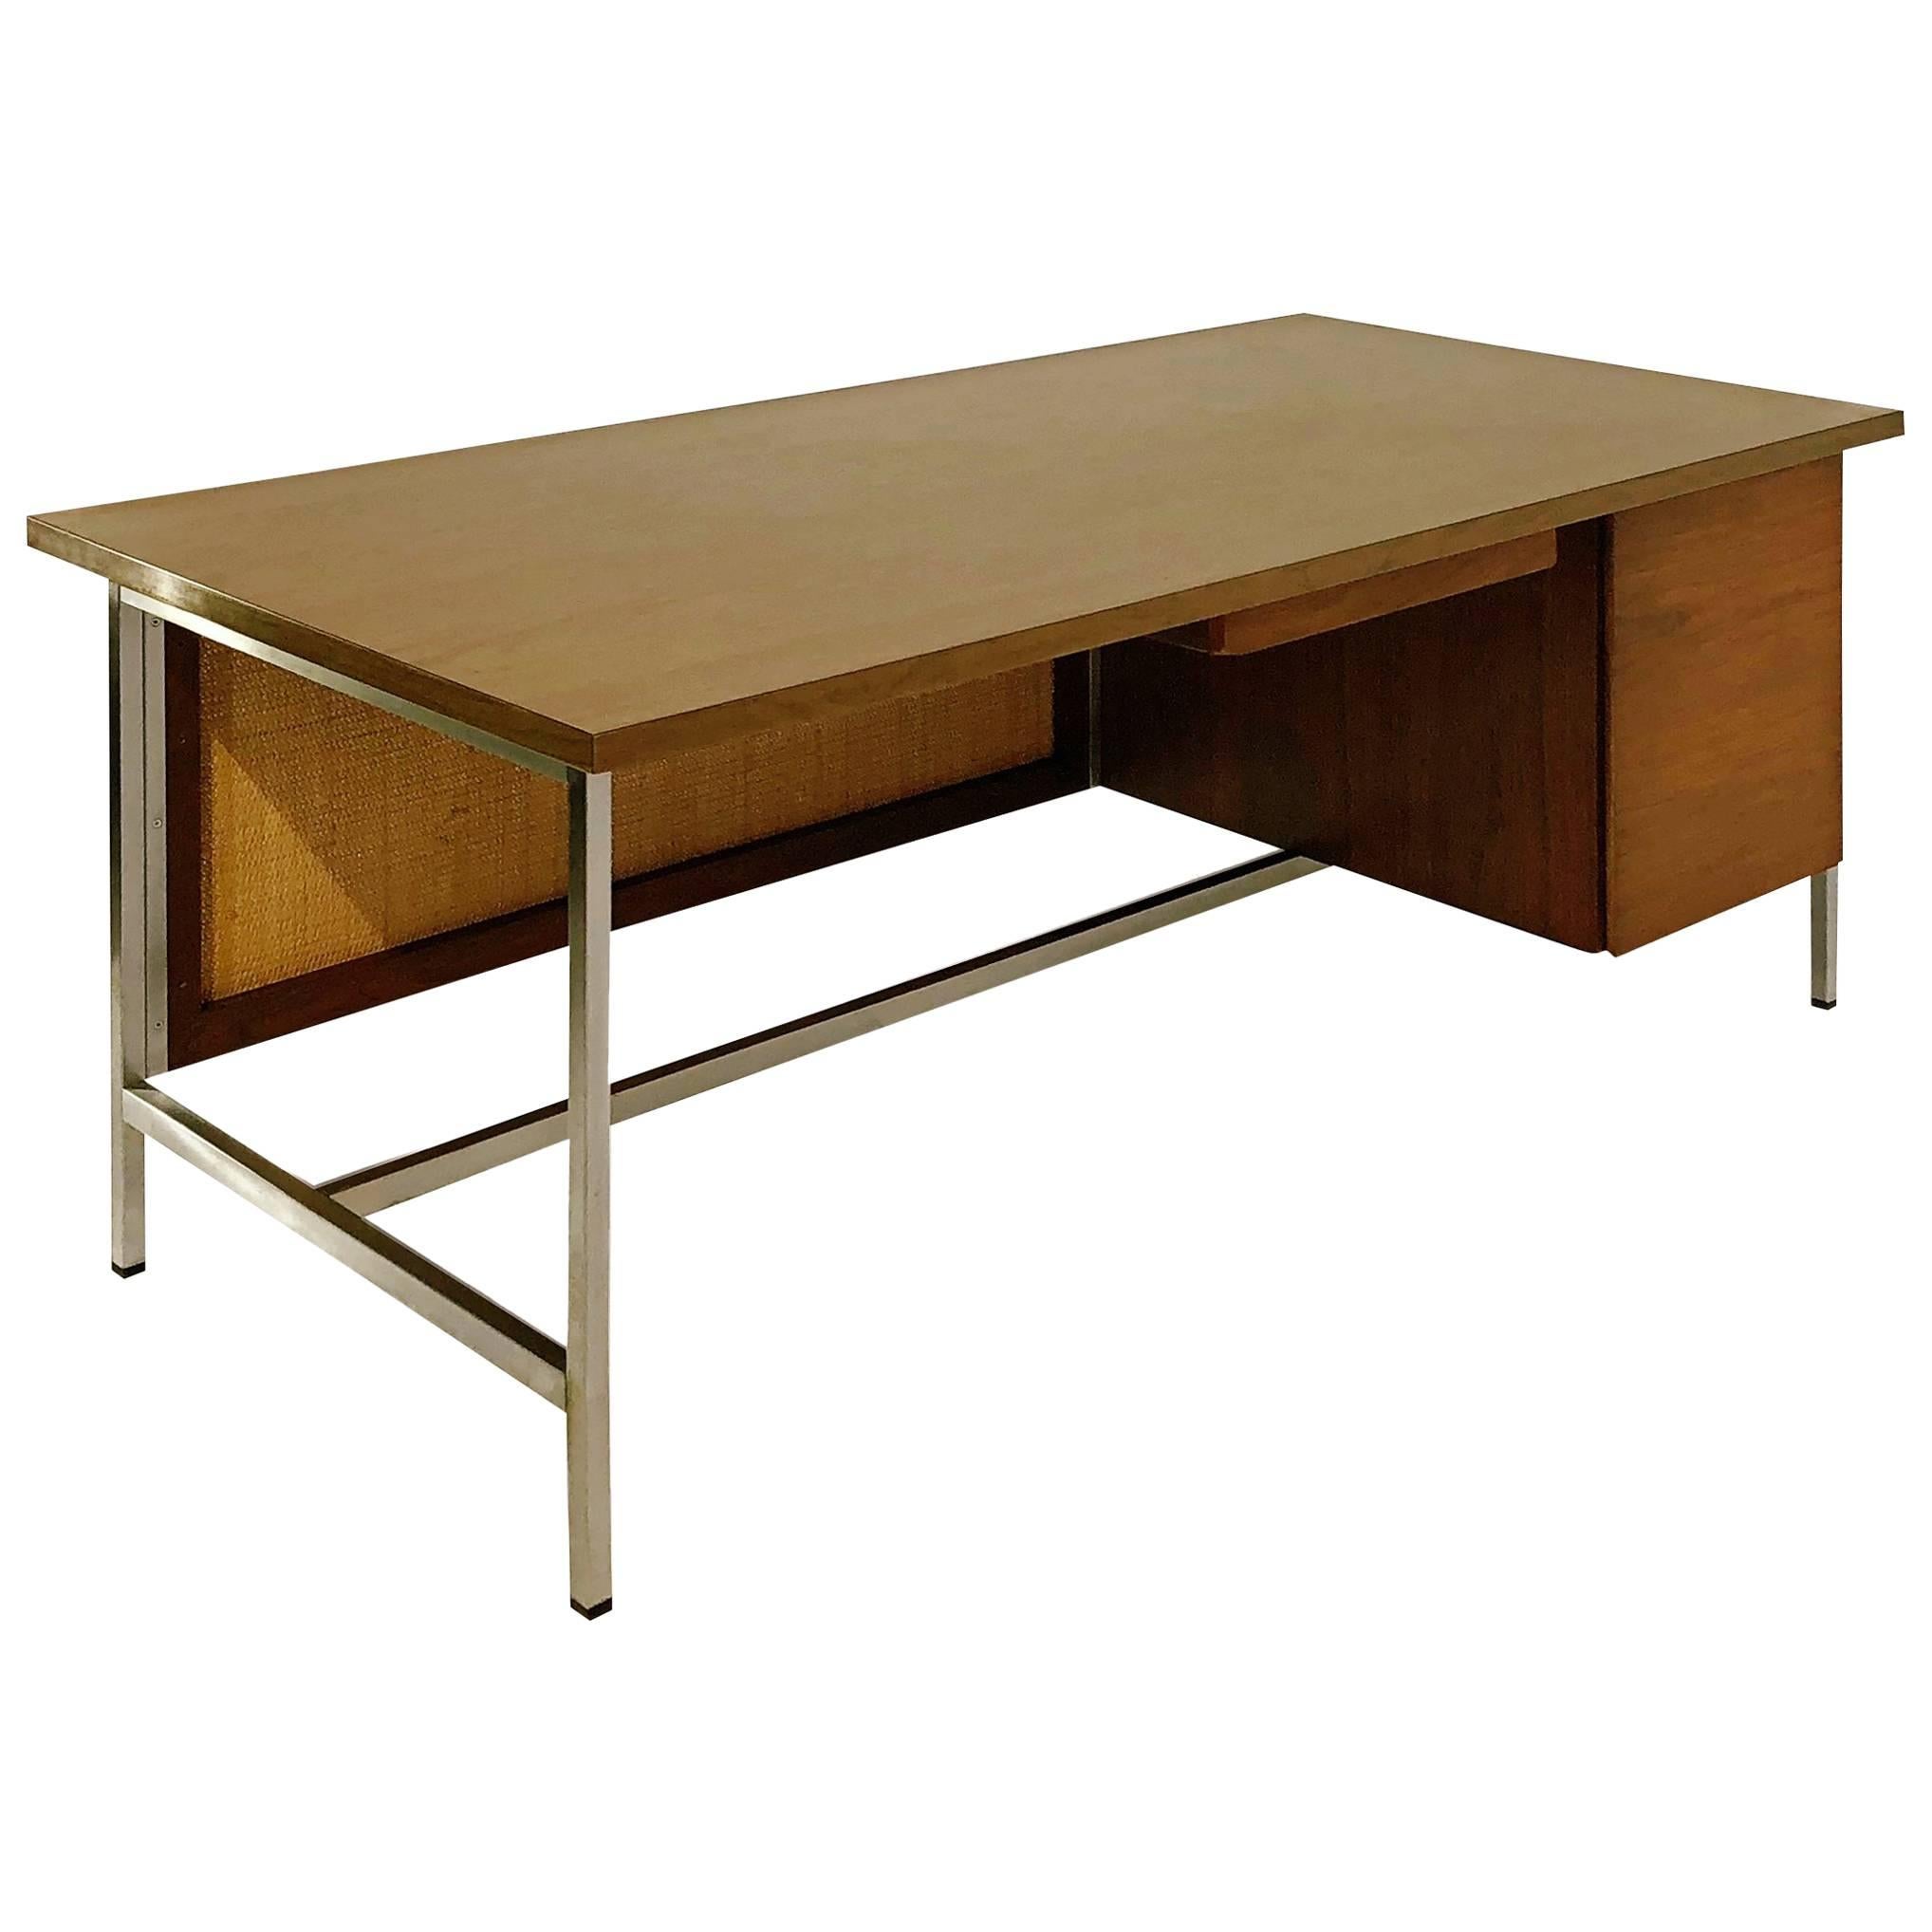 Expansive executive desk by Florence Knoll. This unique example is fabricated from walnut with an attractive grain and features a kneehole modesty panel that is decorated with a George Nelson / Herman Miller style caning on the reverse. Underneath